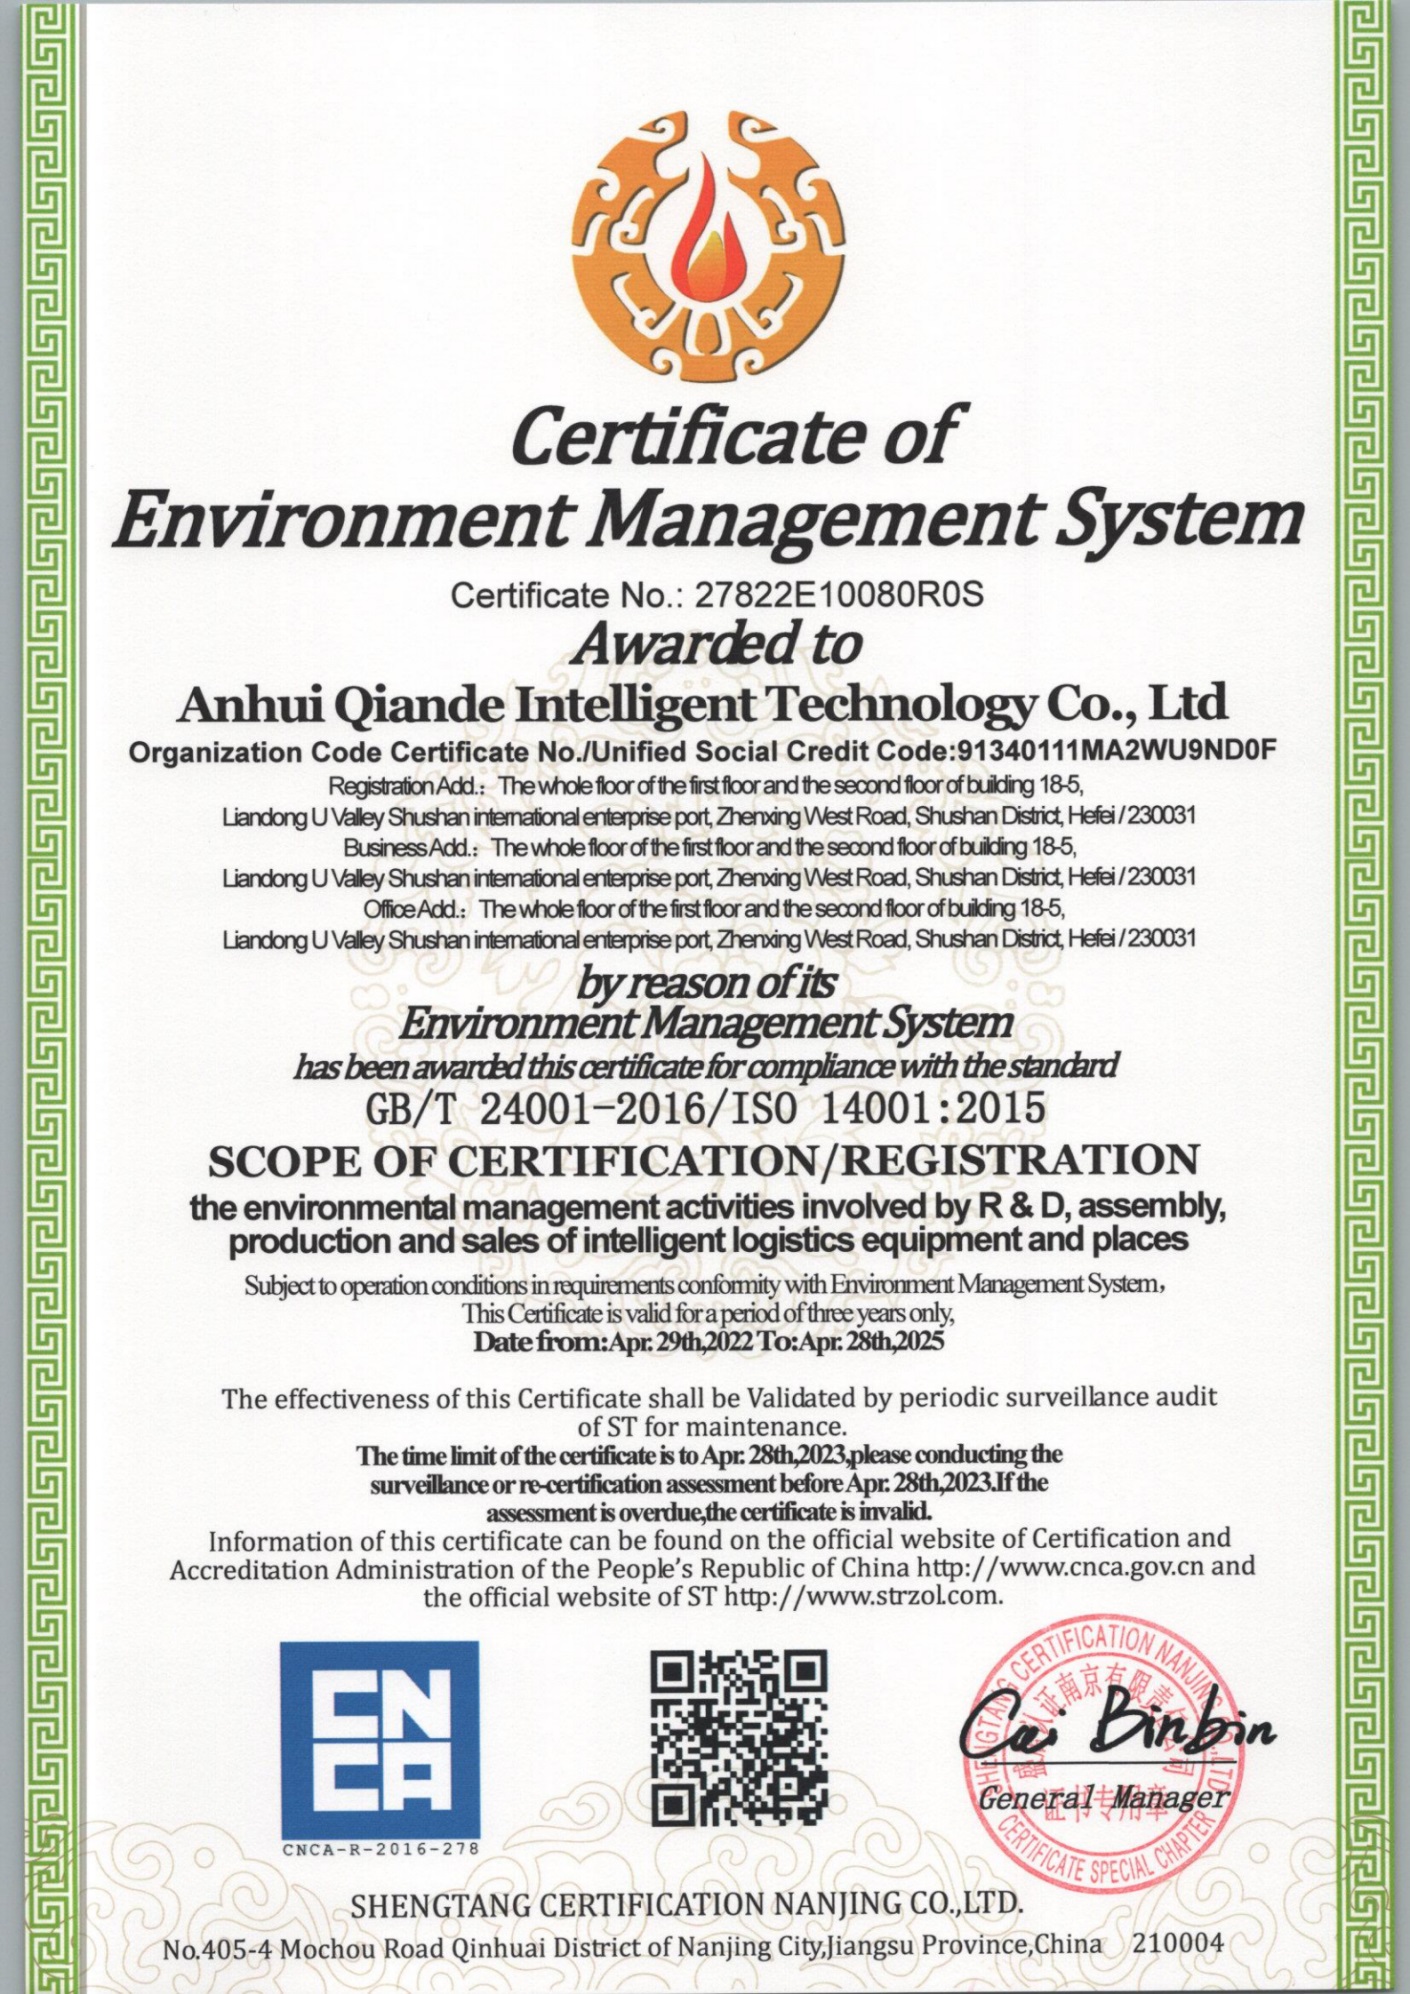 Certificate of Environment Management System.jpg